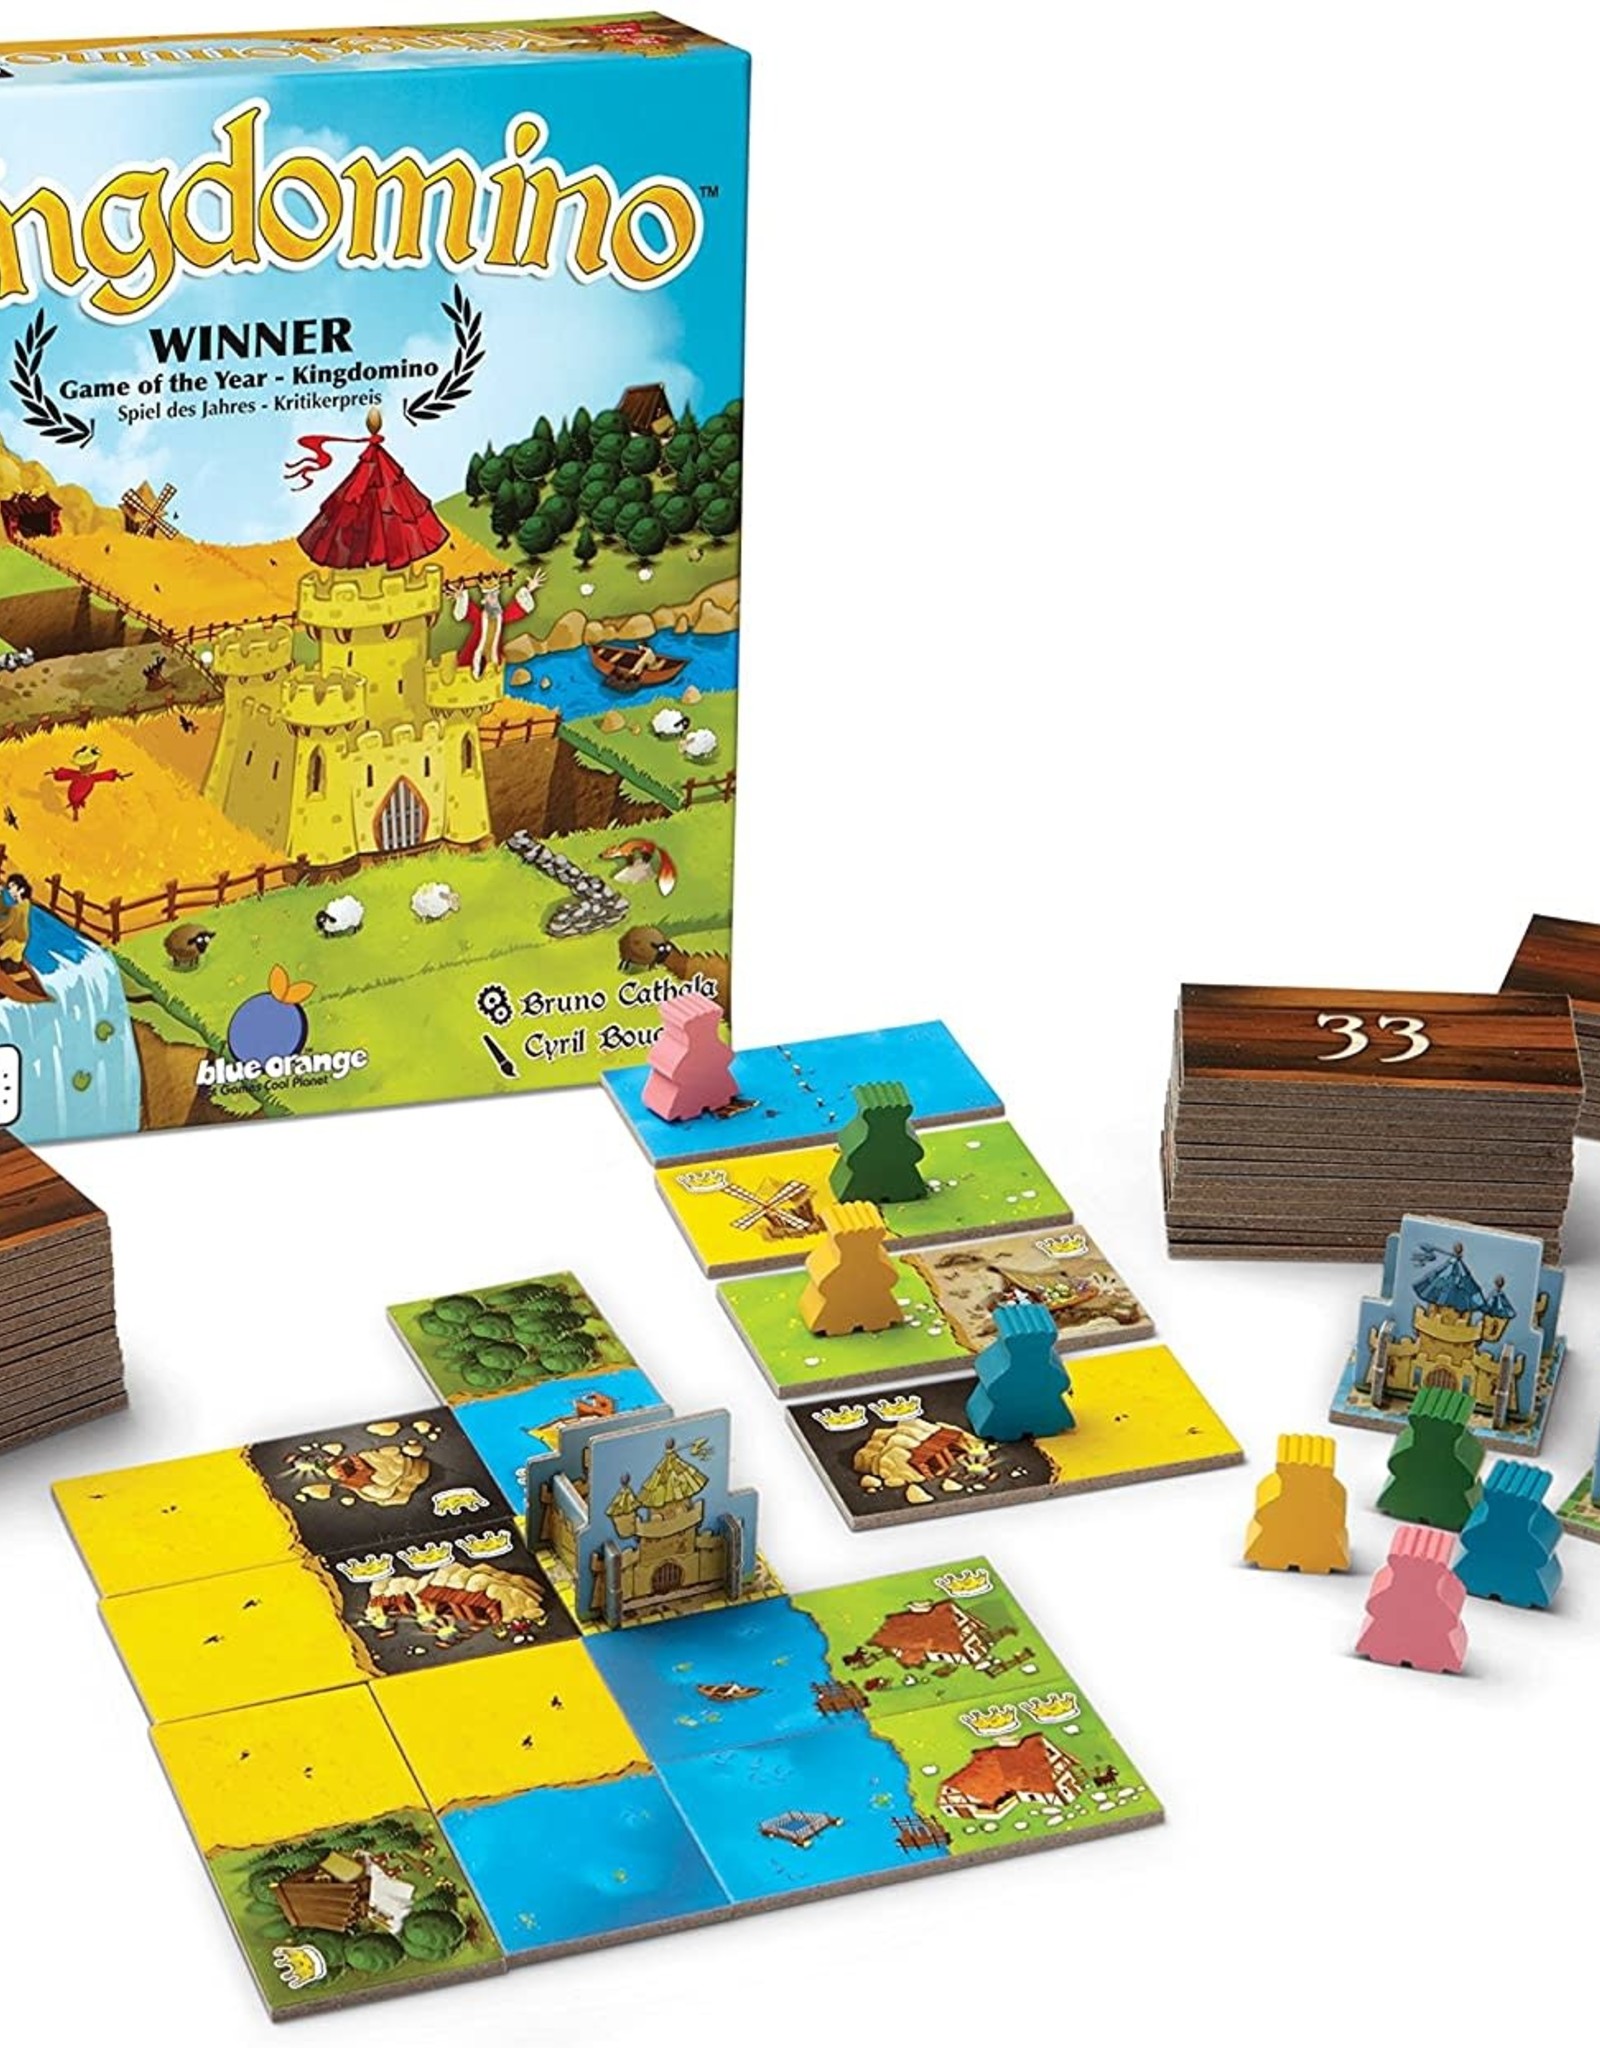 Kingdomino review – a perfectly simple board game